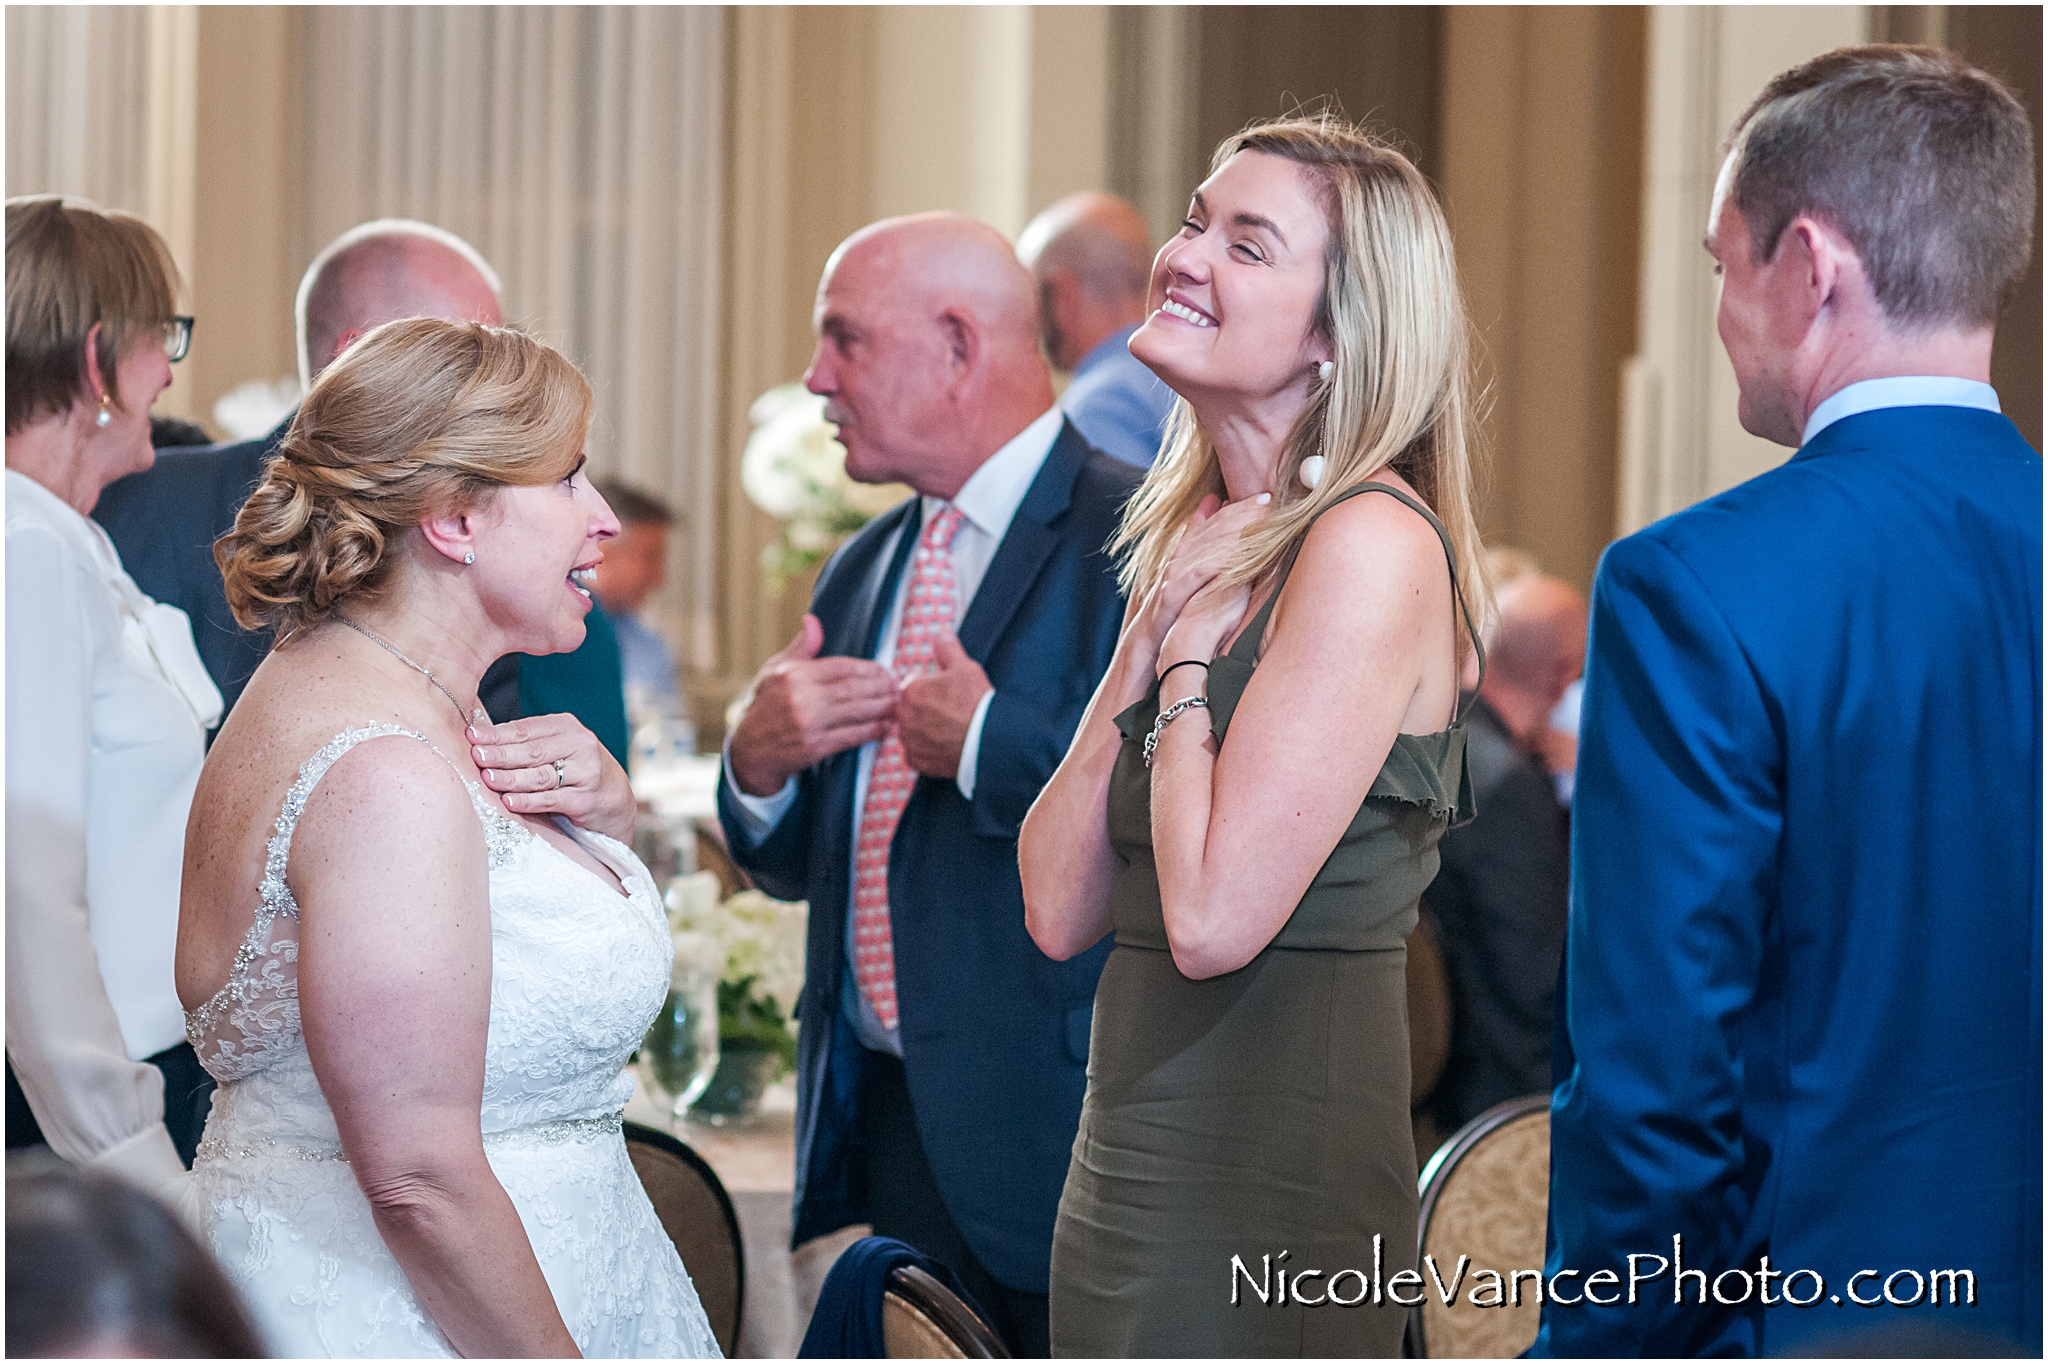 The bride greets her guests during her reception at the Hotel John Marshall.